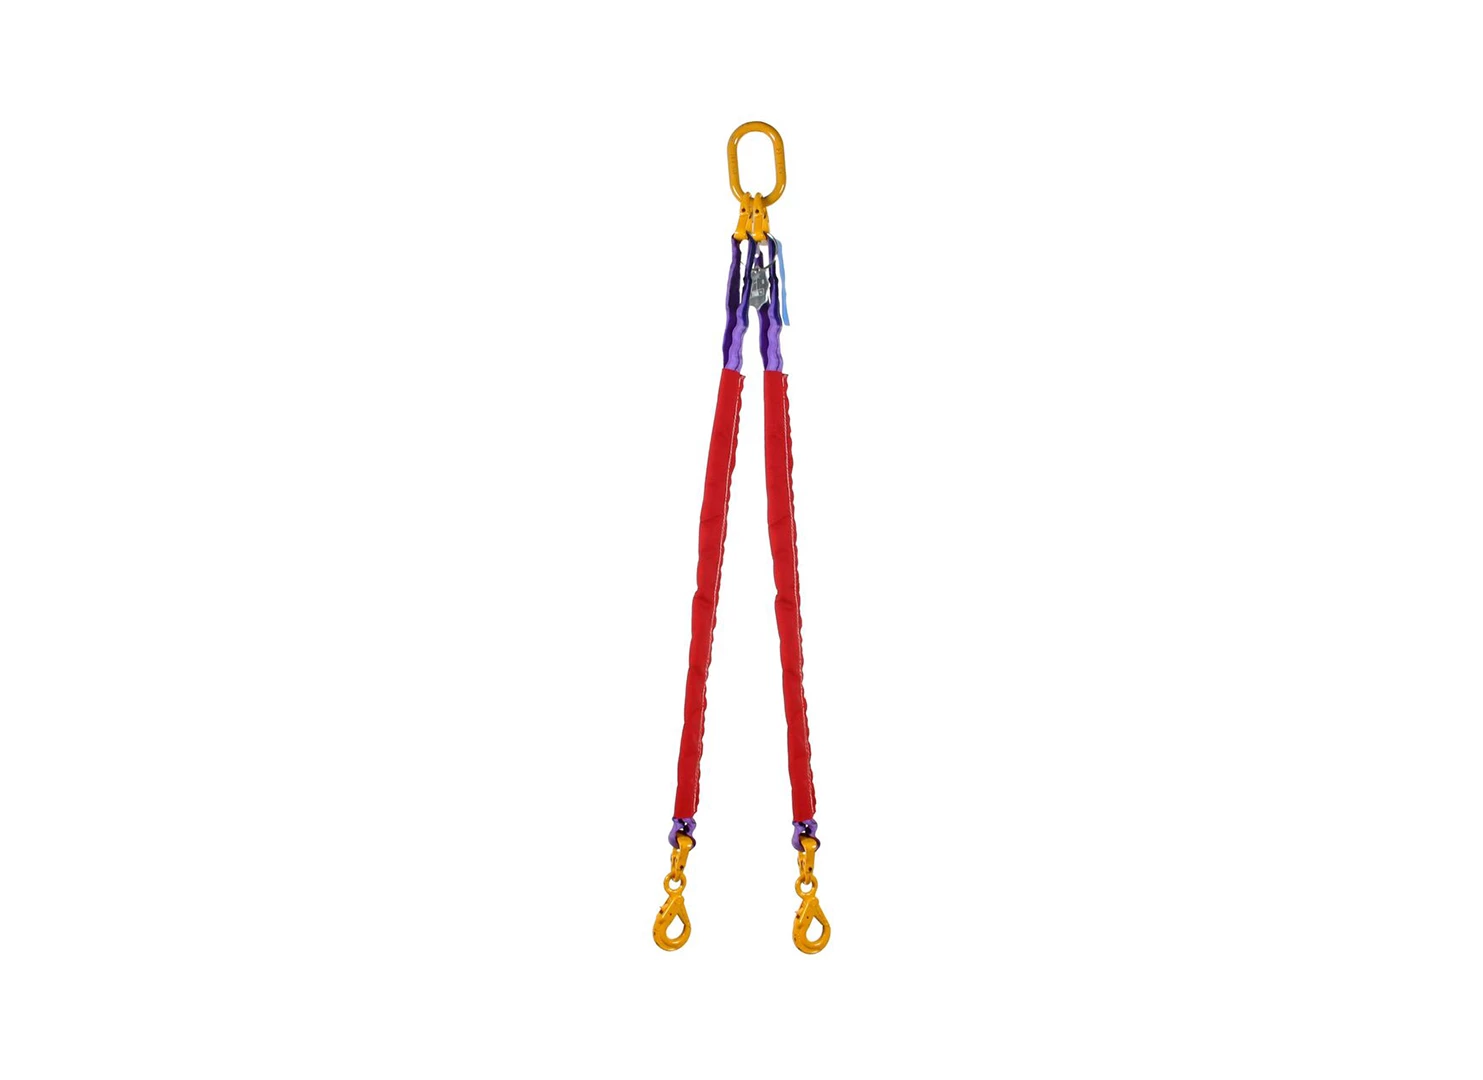 Product: Round slings 1 3t*2,3m